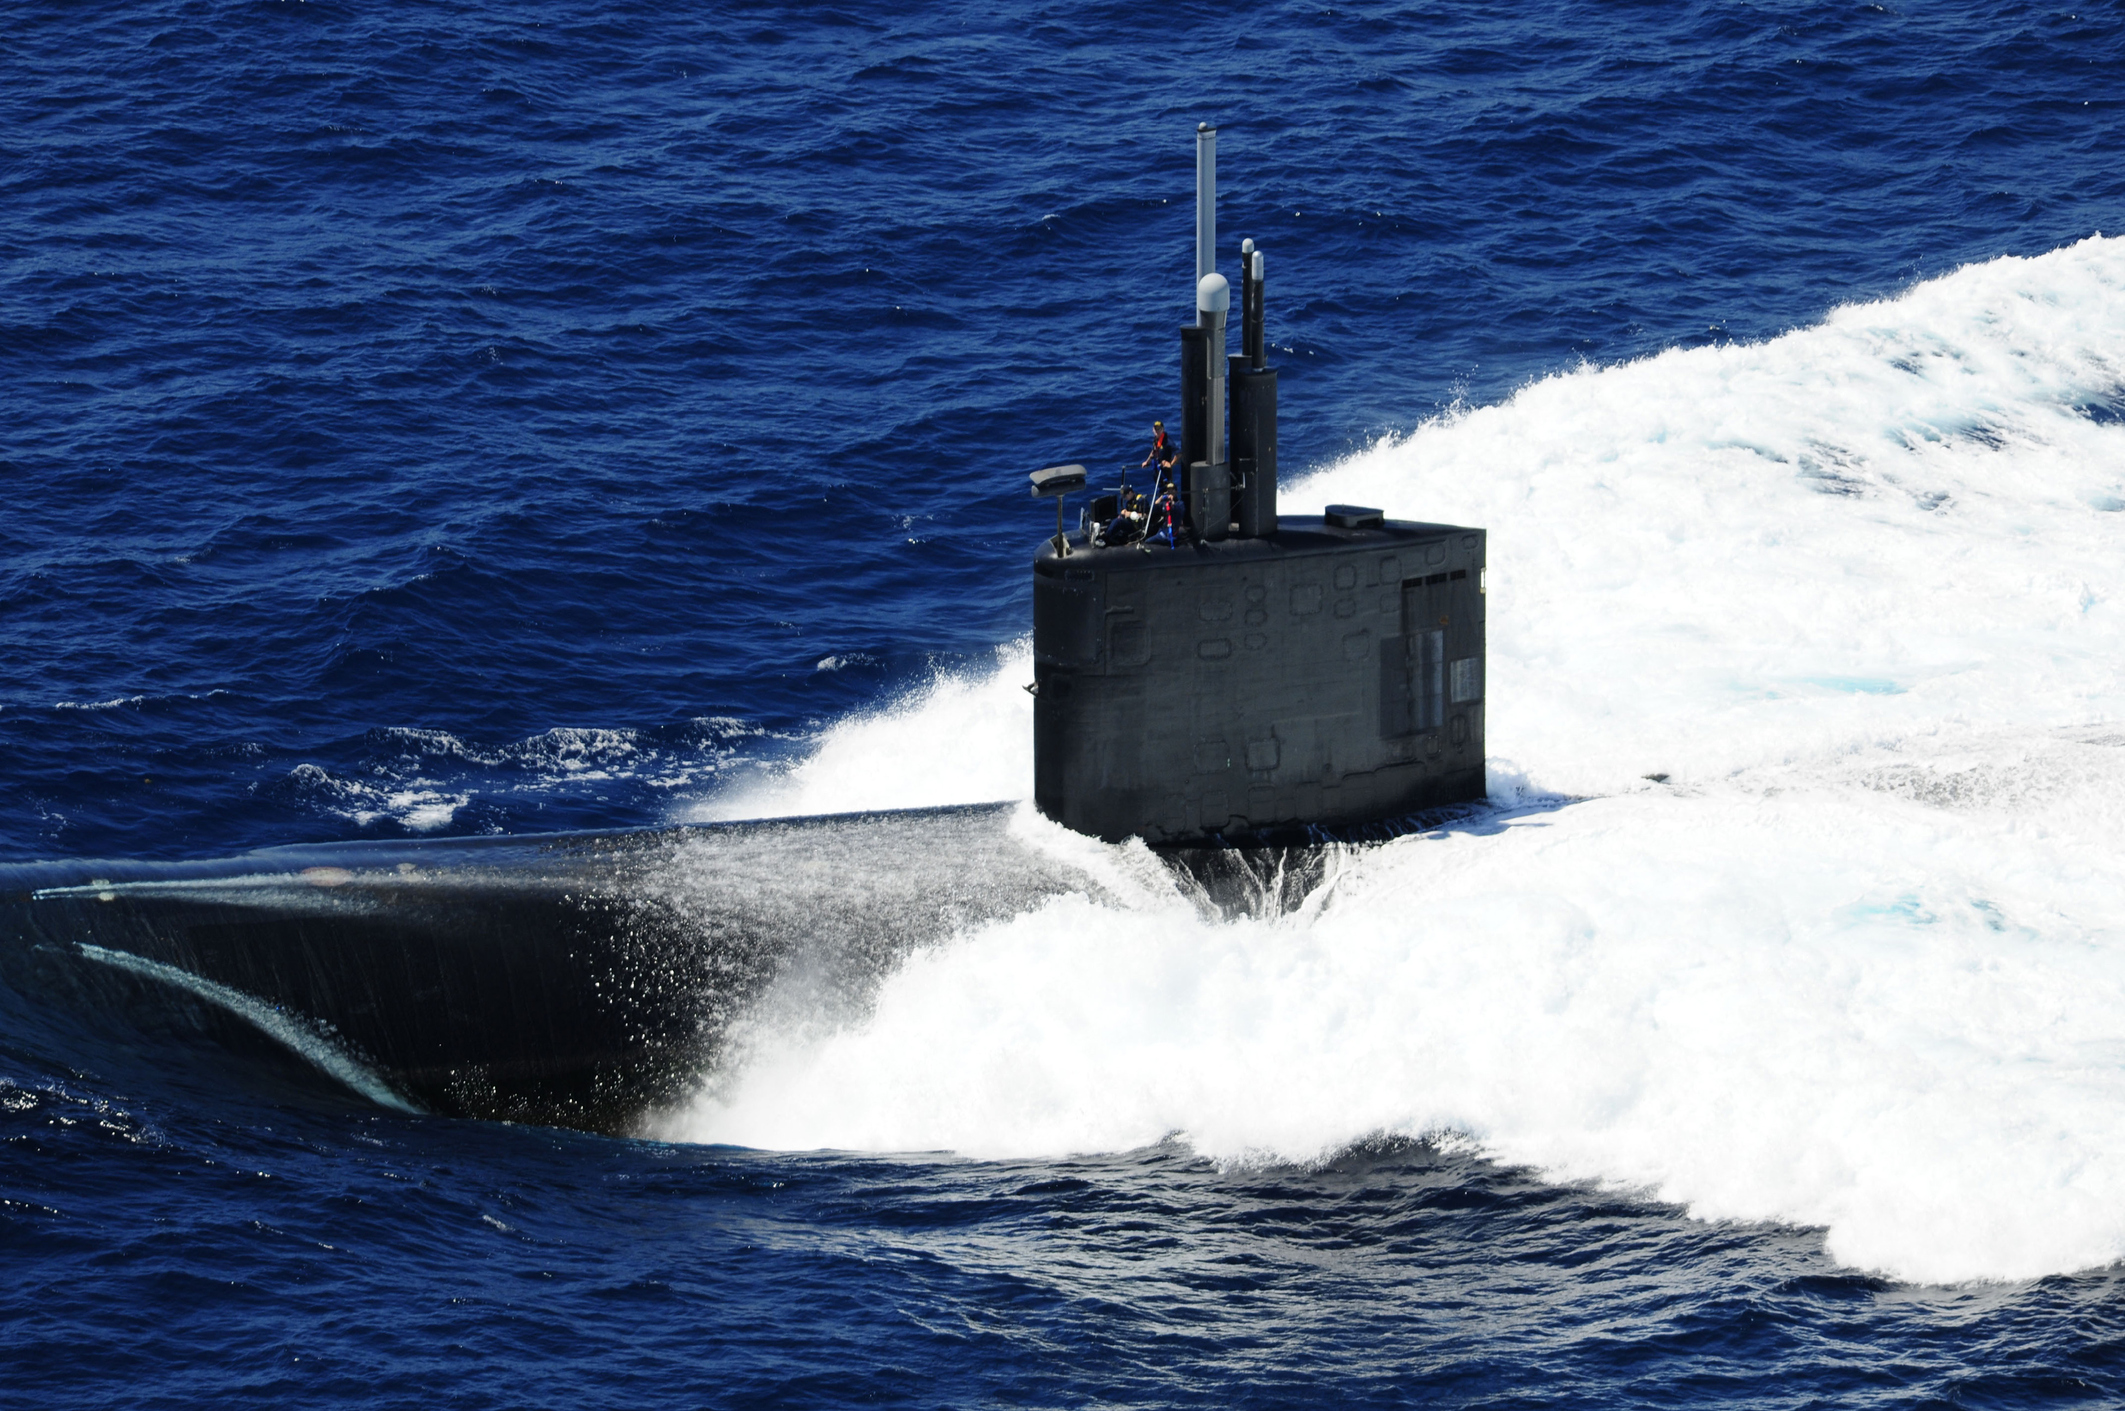 Atlantic Ocean. The fast-attack submarine USS Alexandria (SSN 757) surfaces for a formation sailing event while participating in the War of 1812 fleet exercise.